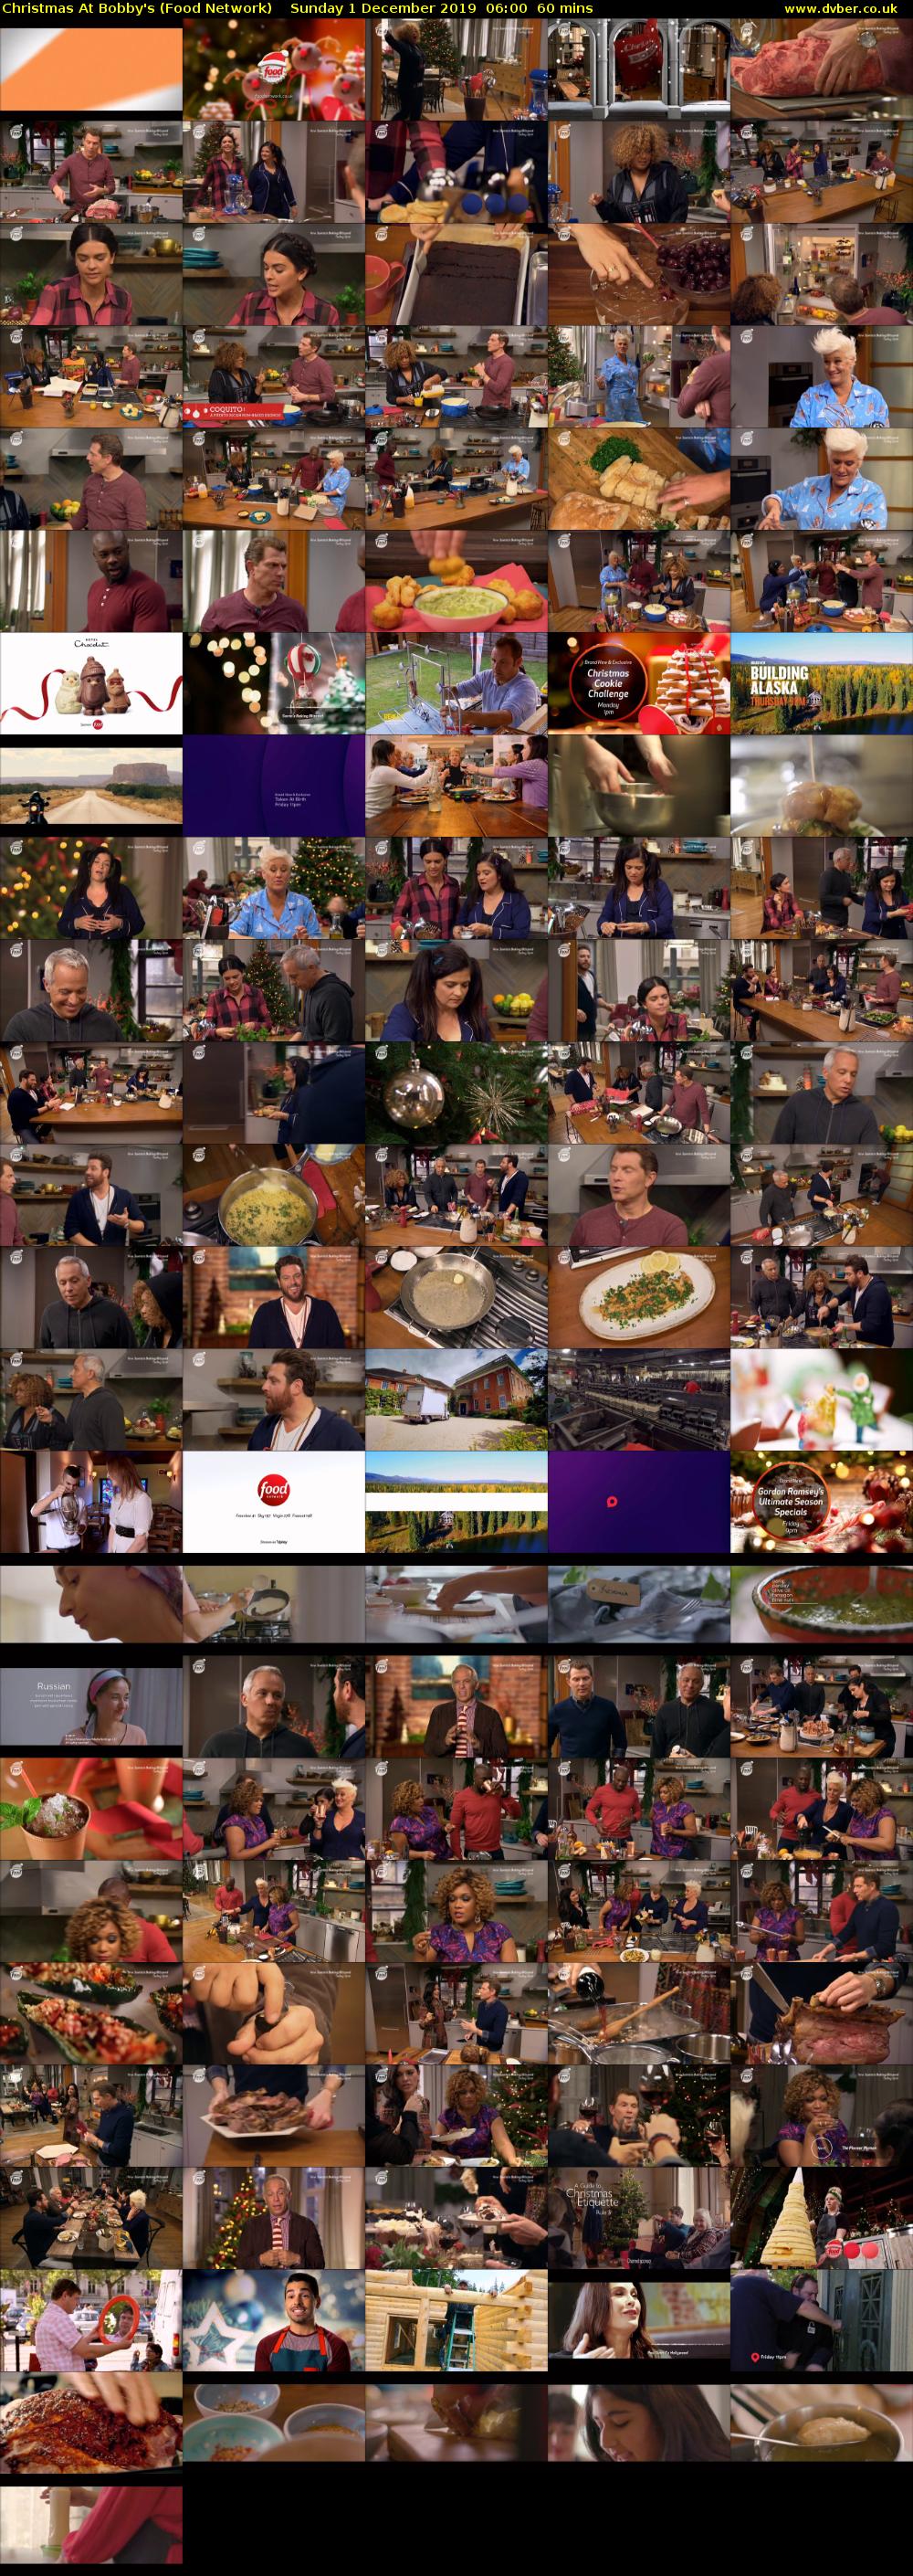 Christmas At Bobby's (Food Network) Sunday 1 December 2019 06:00 - 07:00